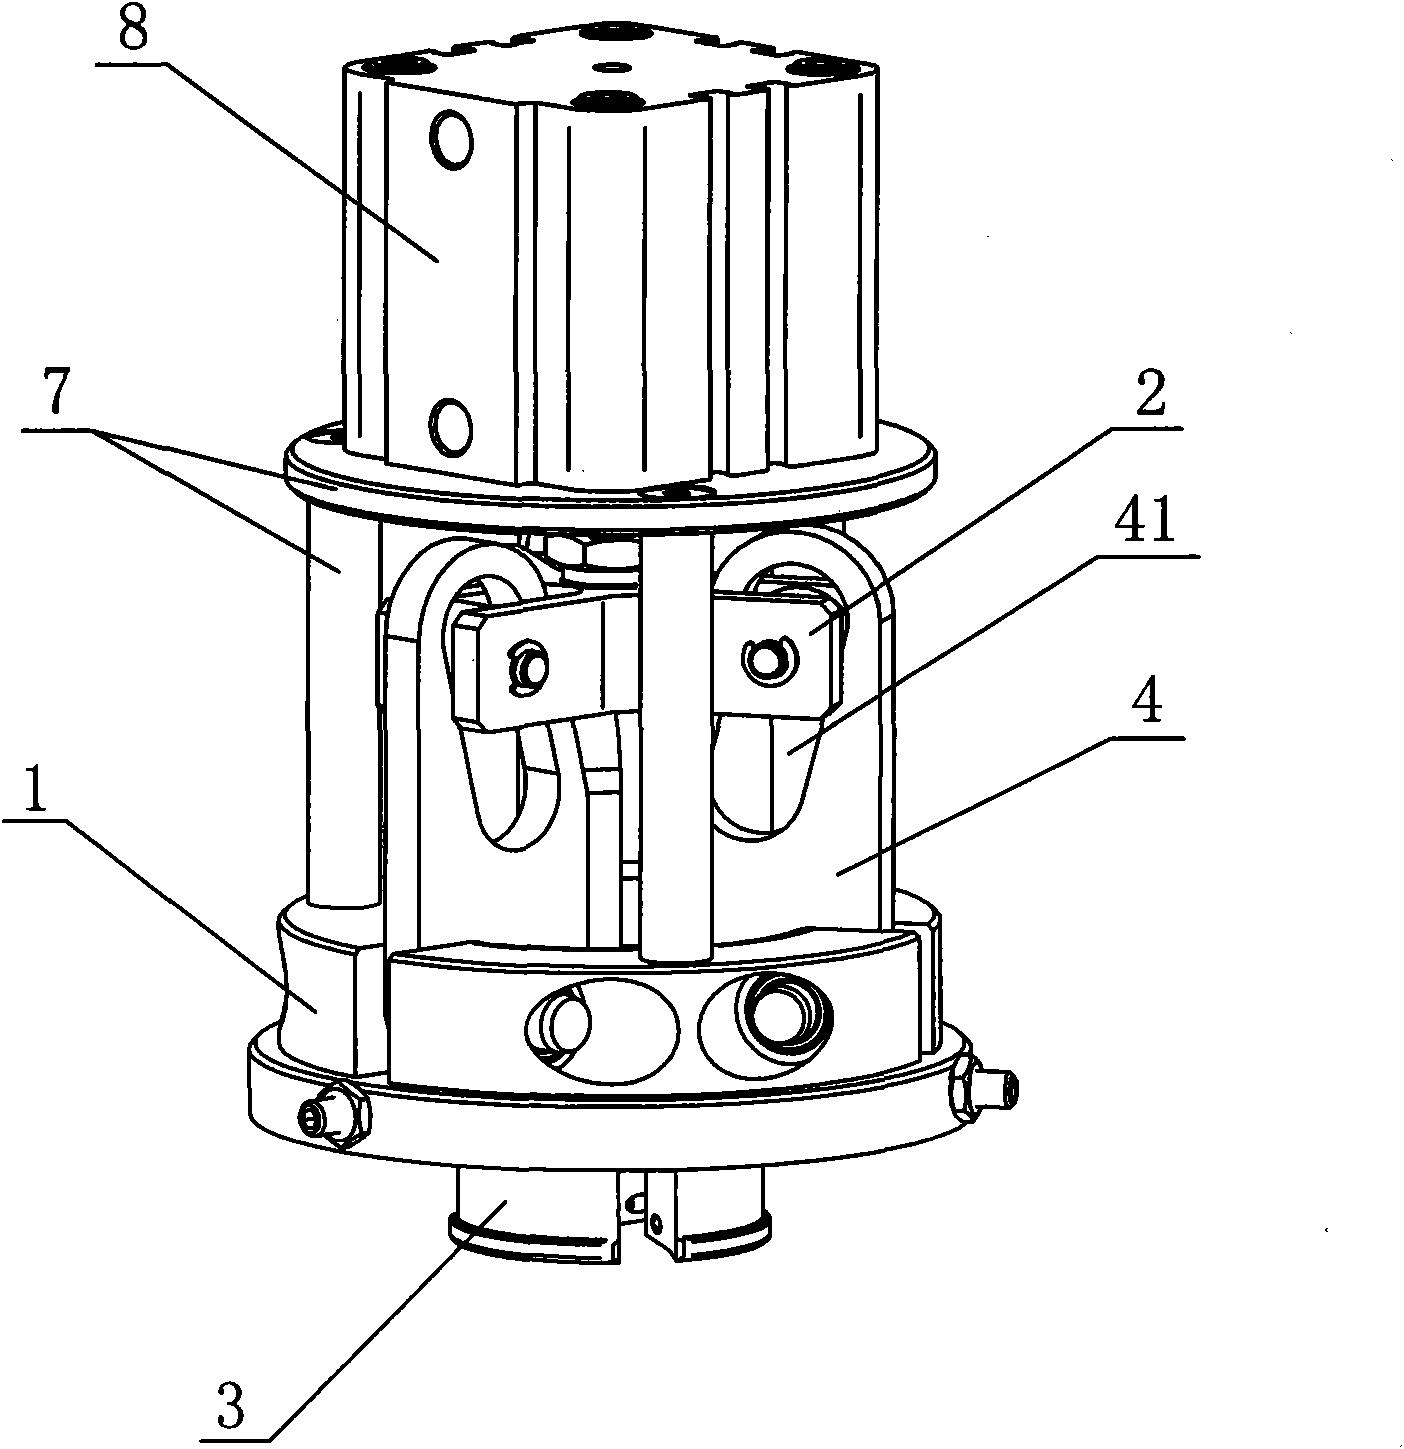 Bottom cover sealing device for liquid paper can